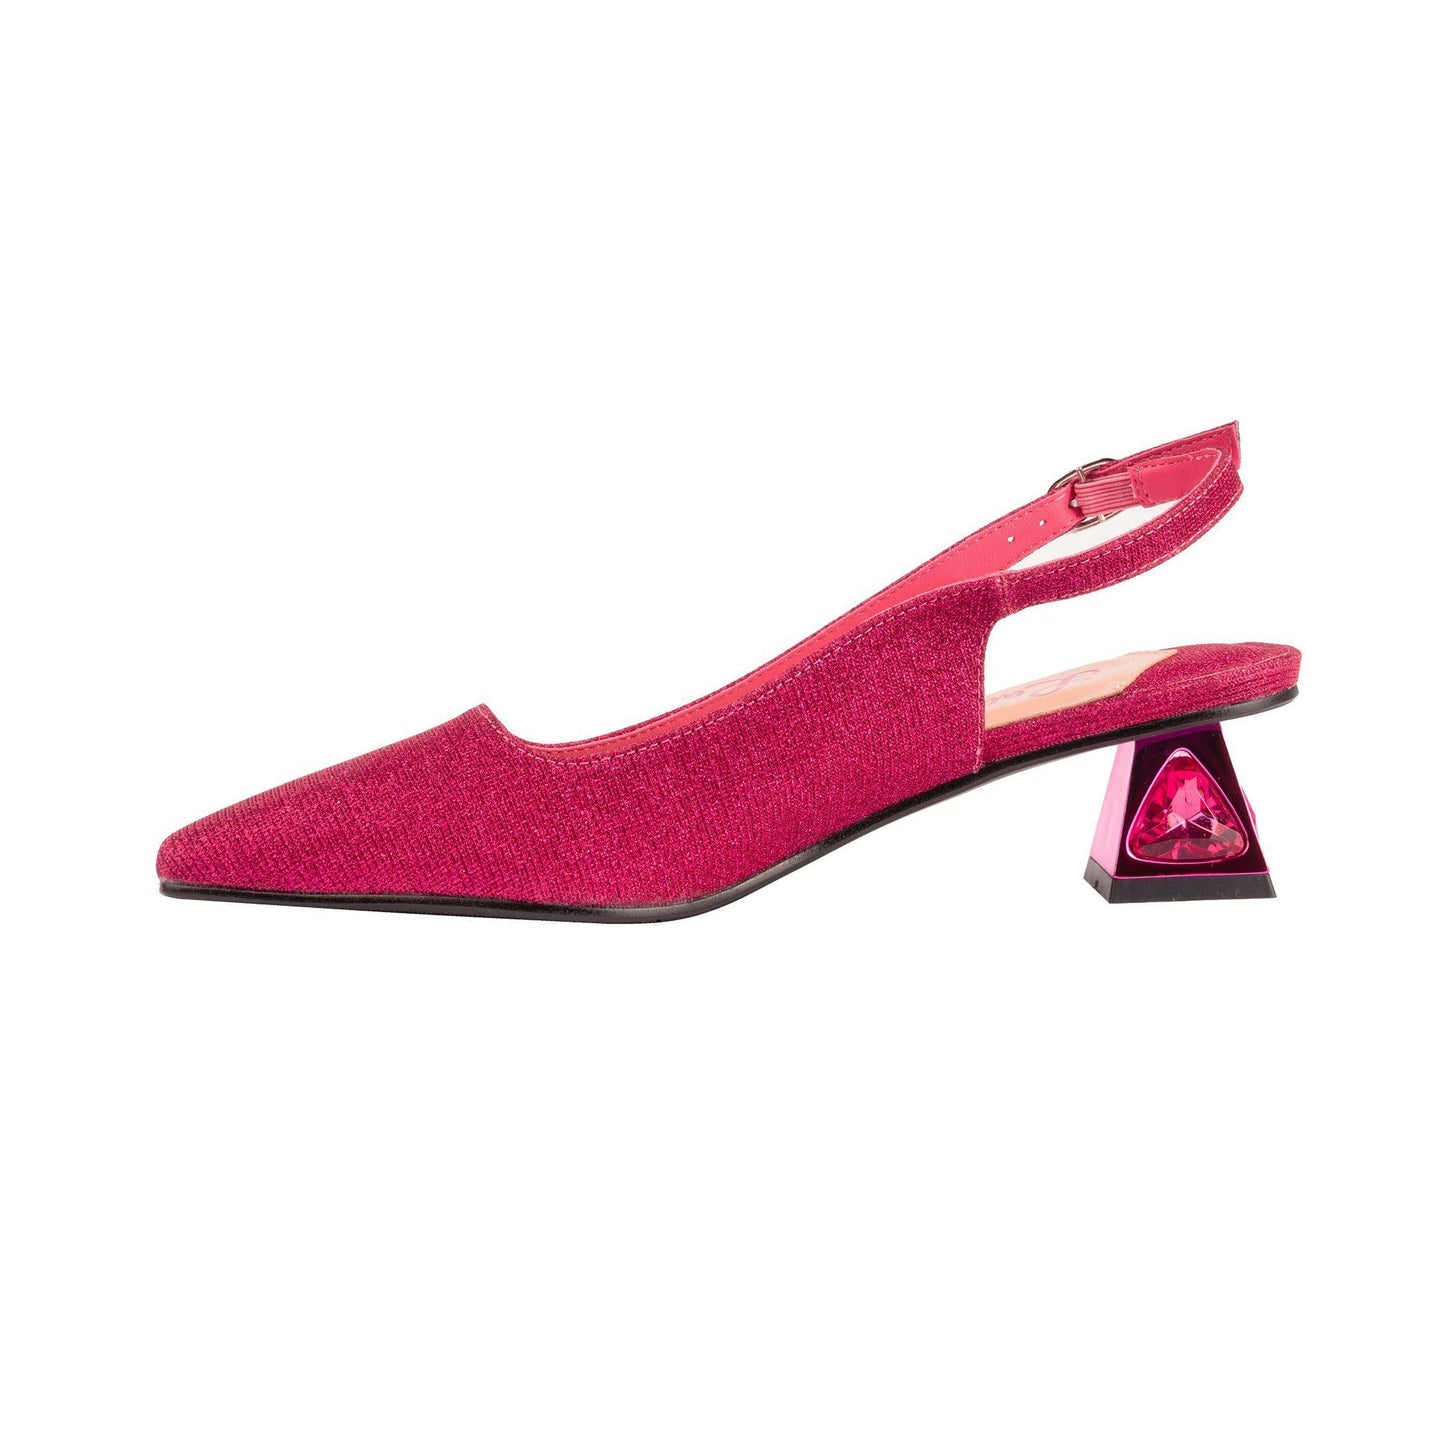 Lady Couture RUBY Glitter Metal Heel Slingback